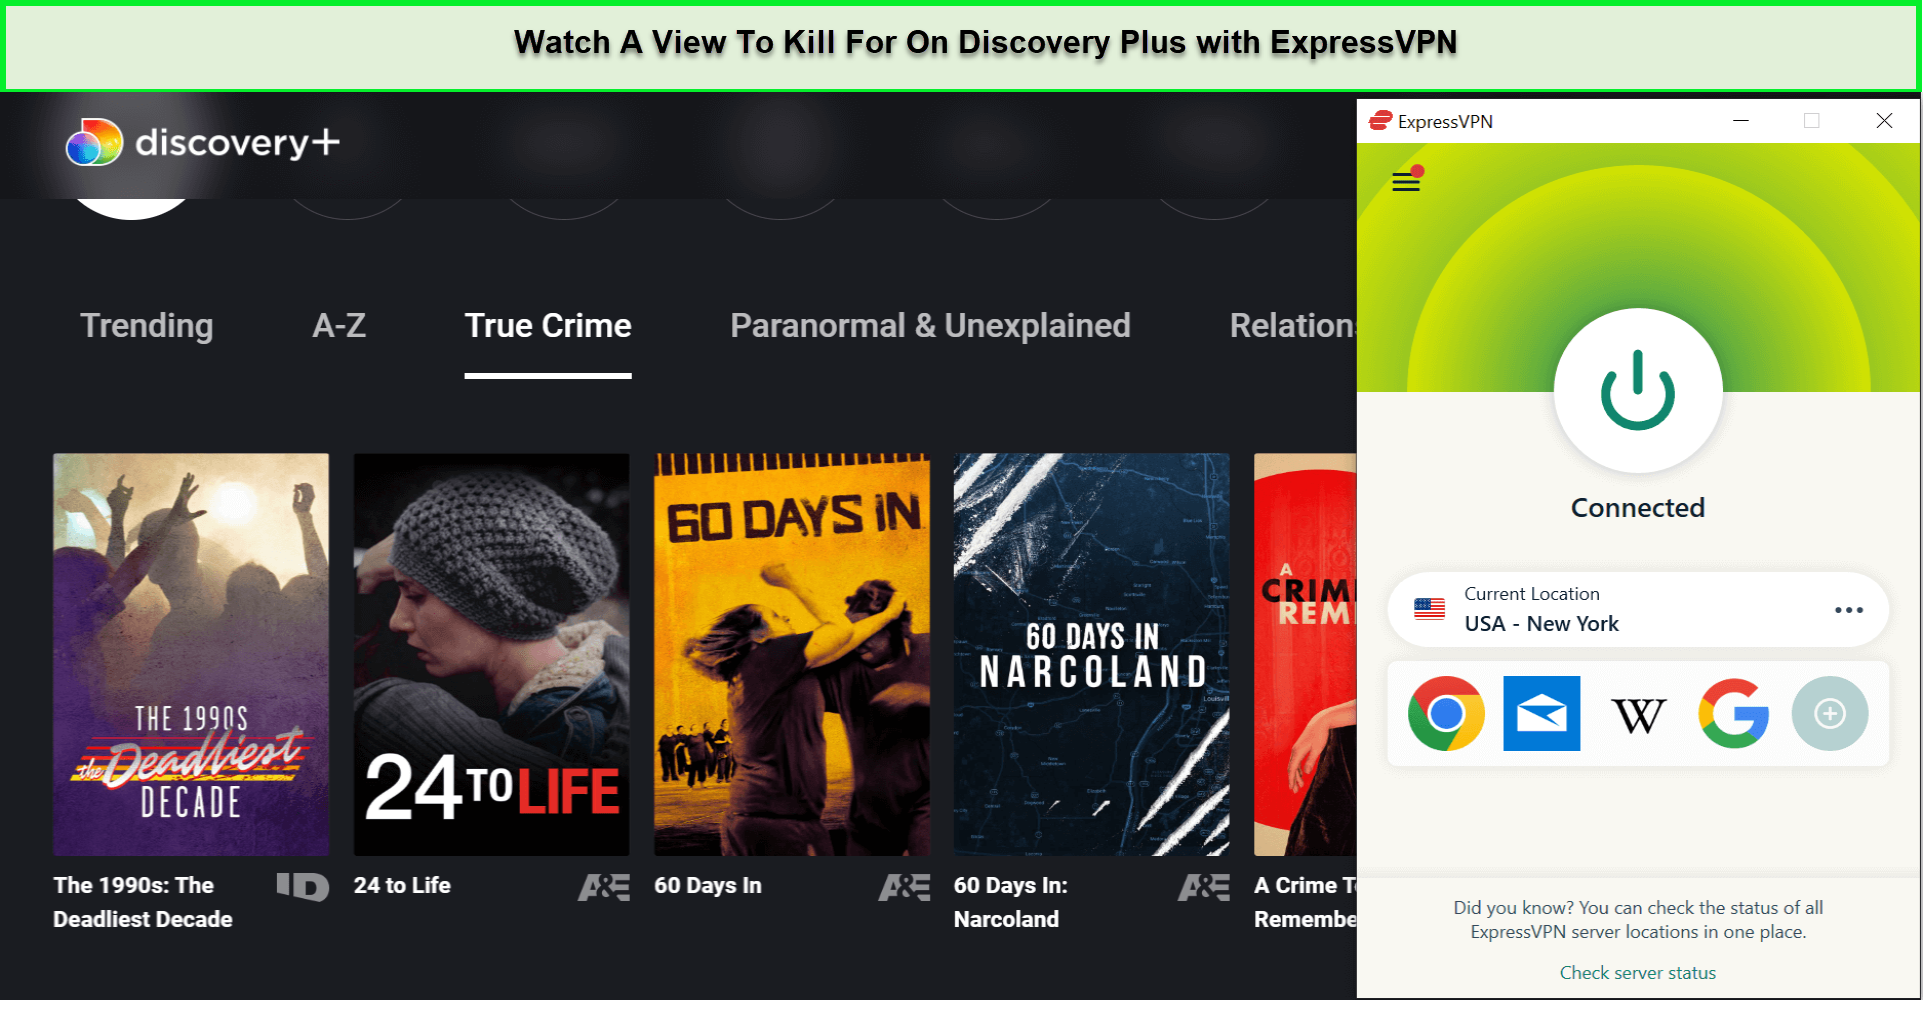 Watch-A-View-To-Kill-For-in-Japan-On-Discovery-Plus-with-ExpressVPN